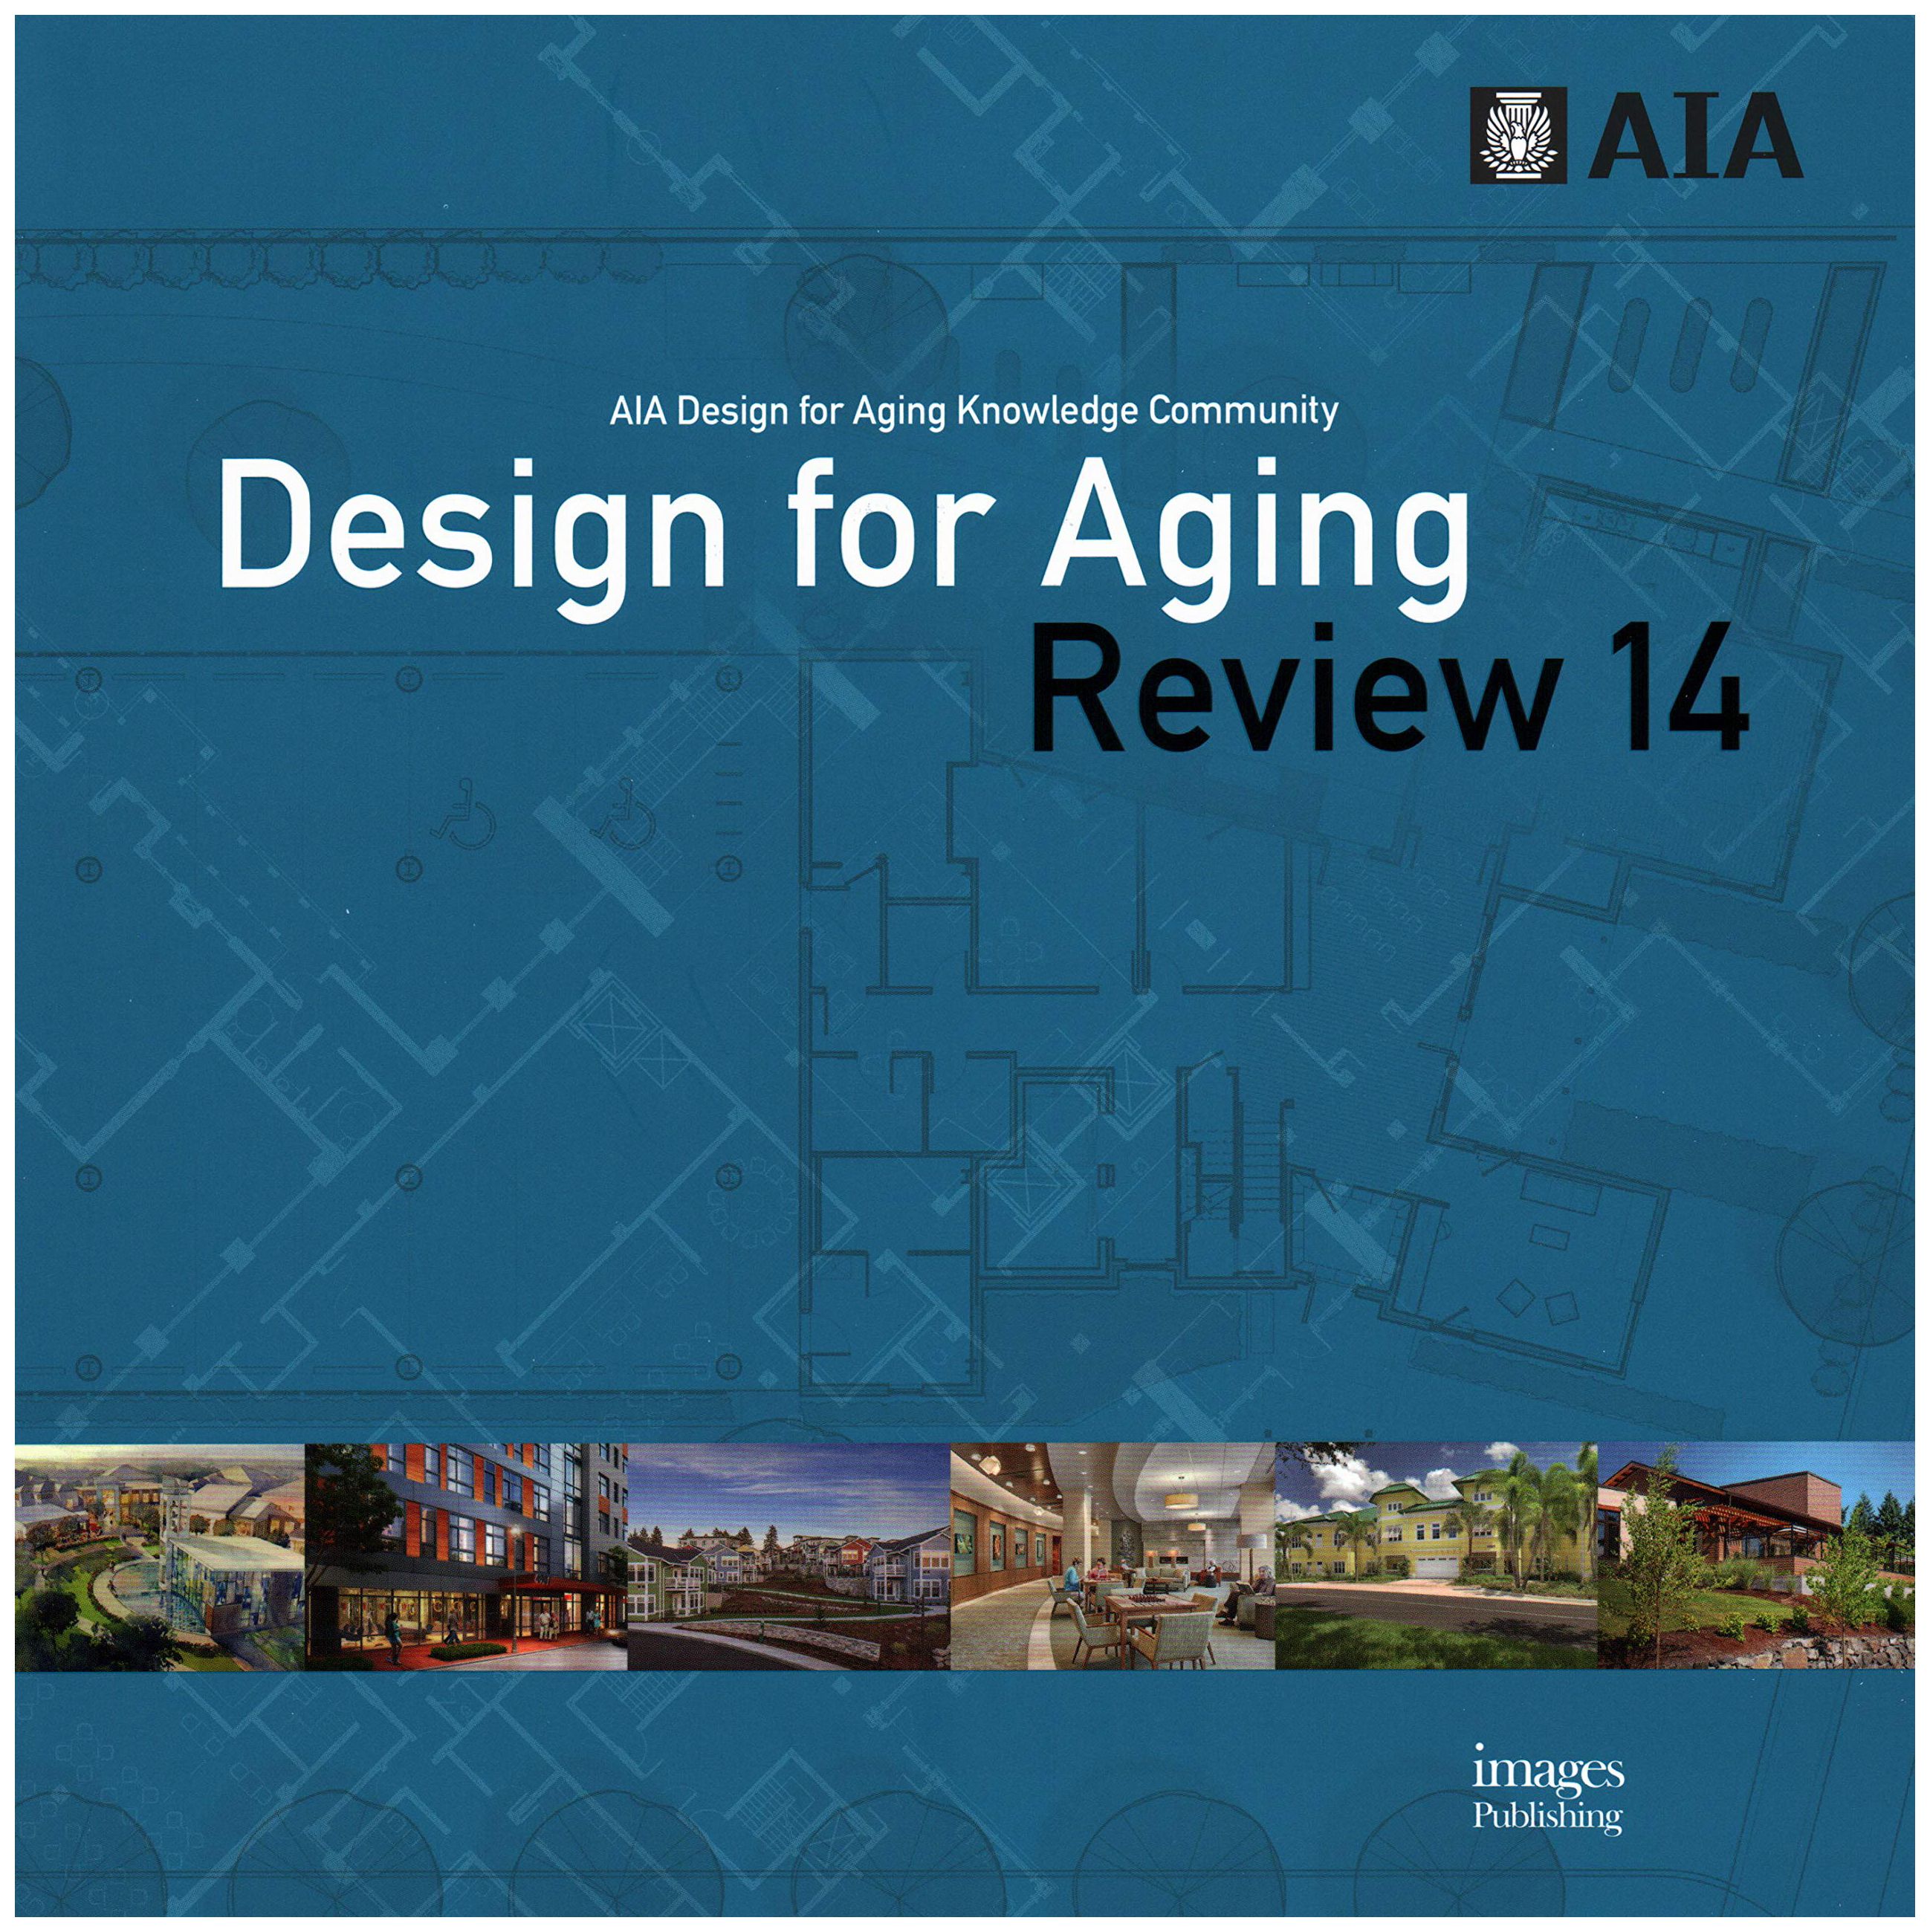 Design for Aging. AIA Review 14